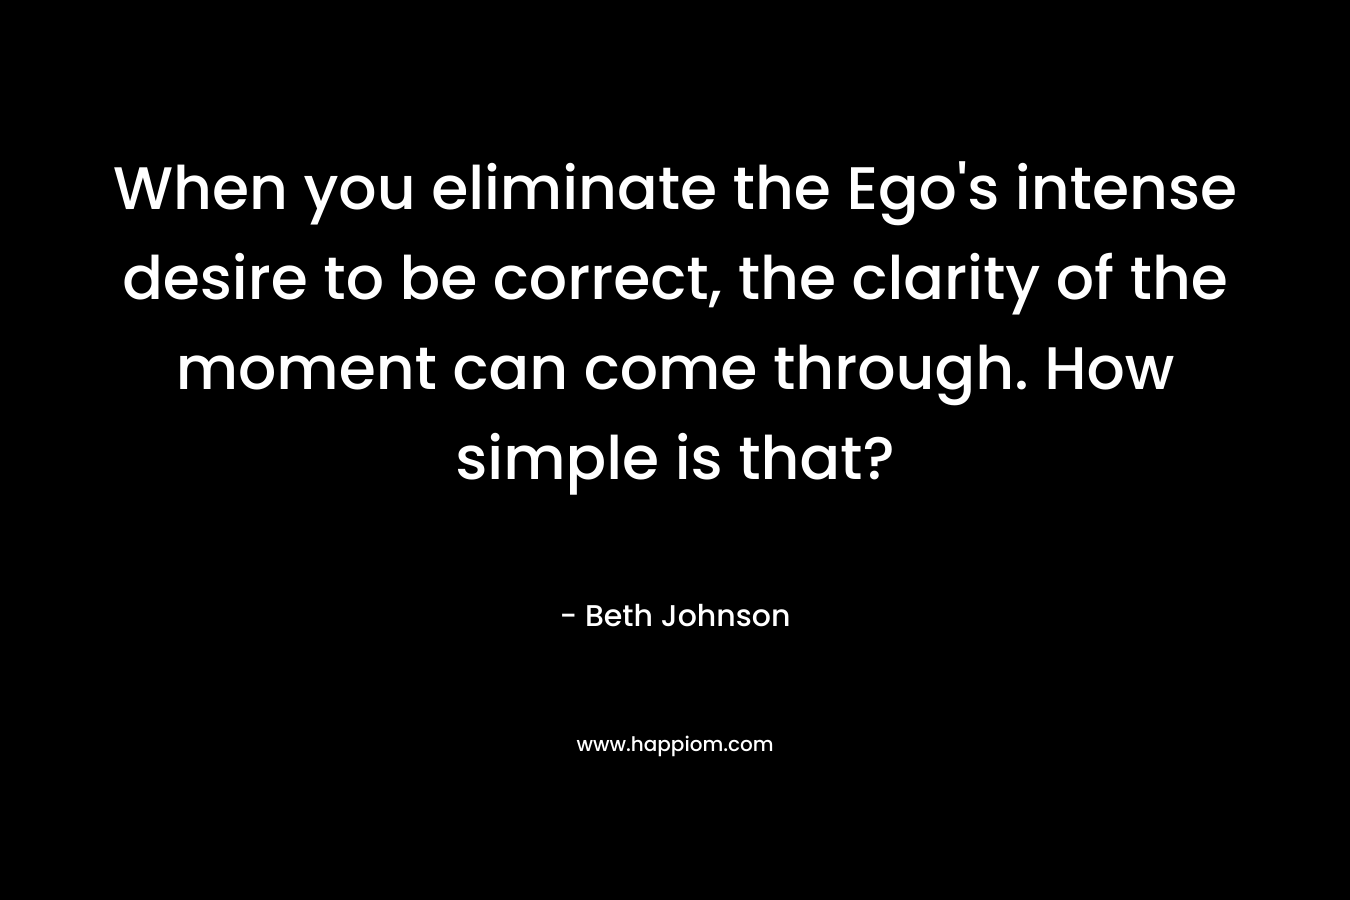 When you eliminate the Ego's intense desire to be correct, the clarity of the moment can come through. How simple is that?